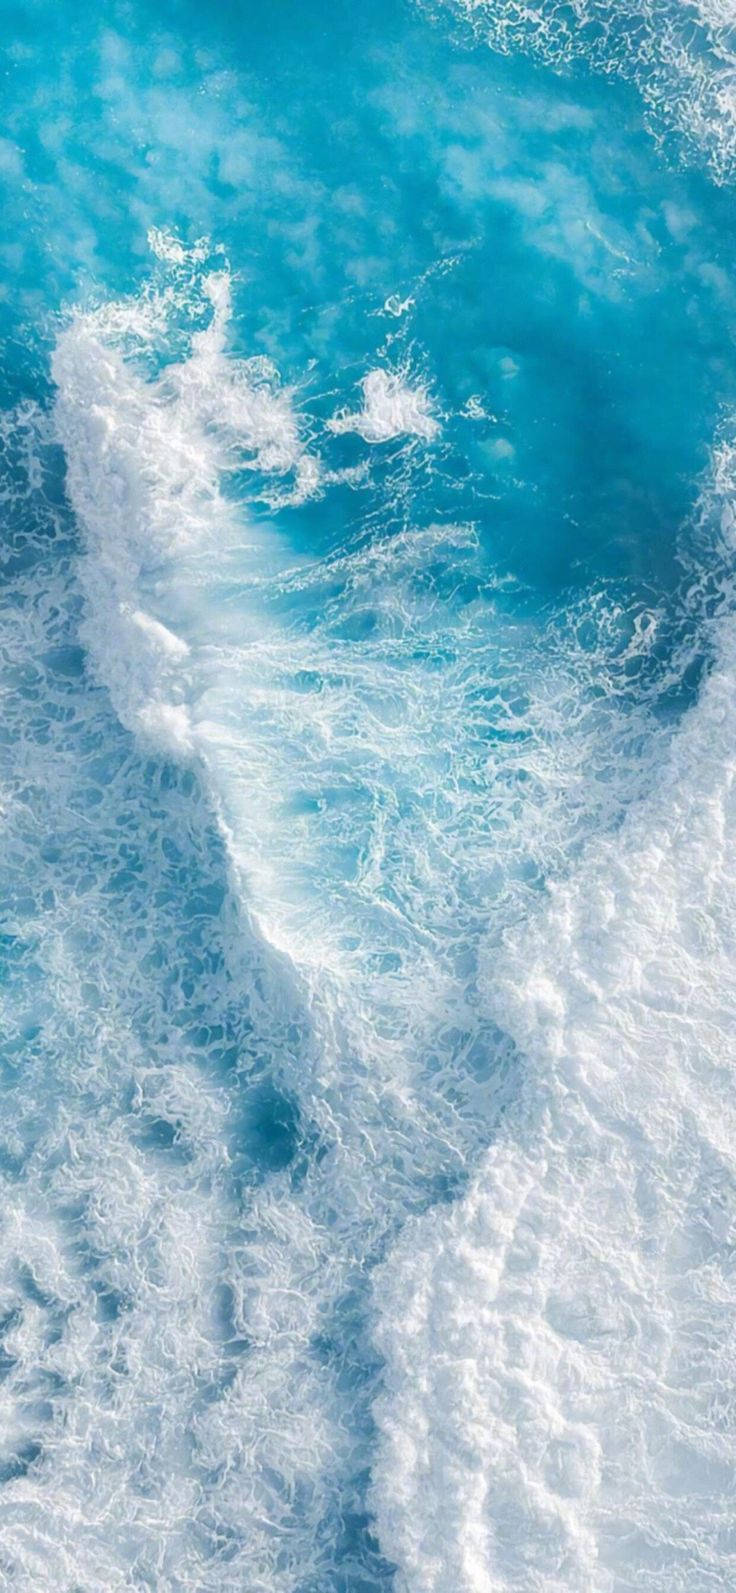 Iphone 12 Pro Blue Waters Wallpaper